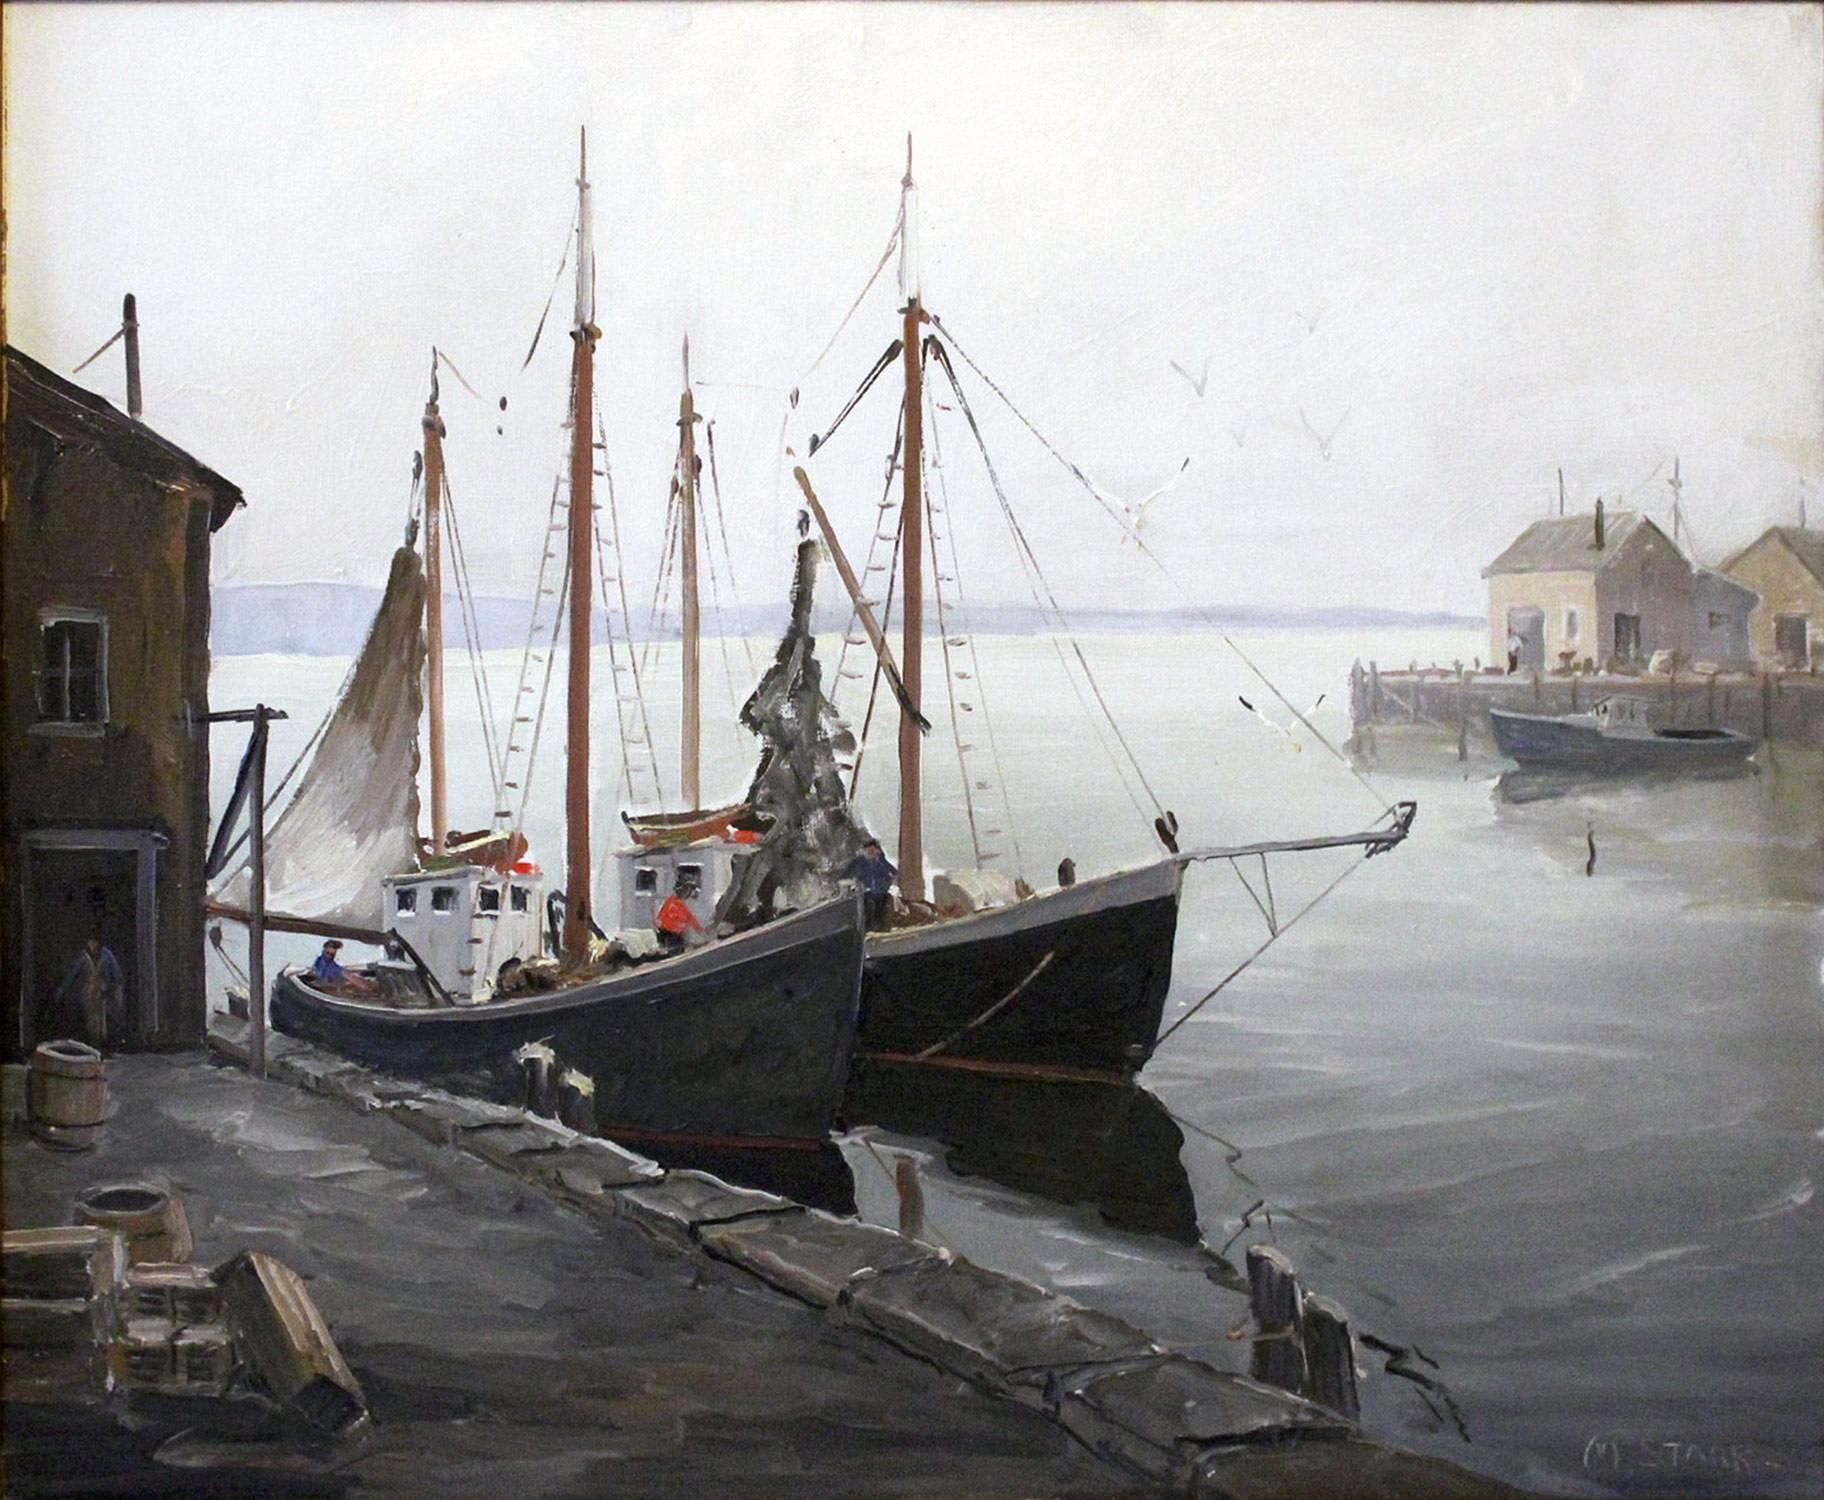 Boats Docked by the Harbor - Painting by Melville F. Stark